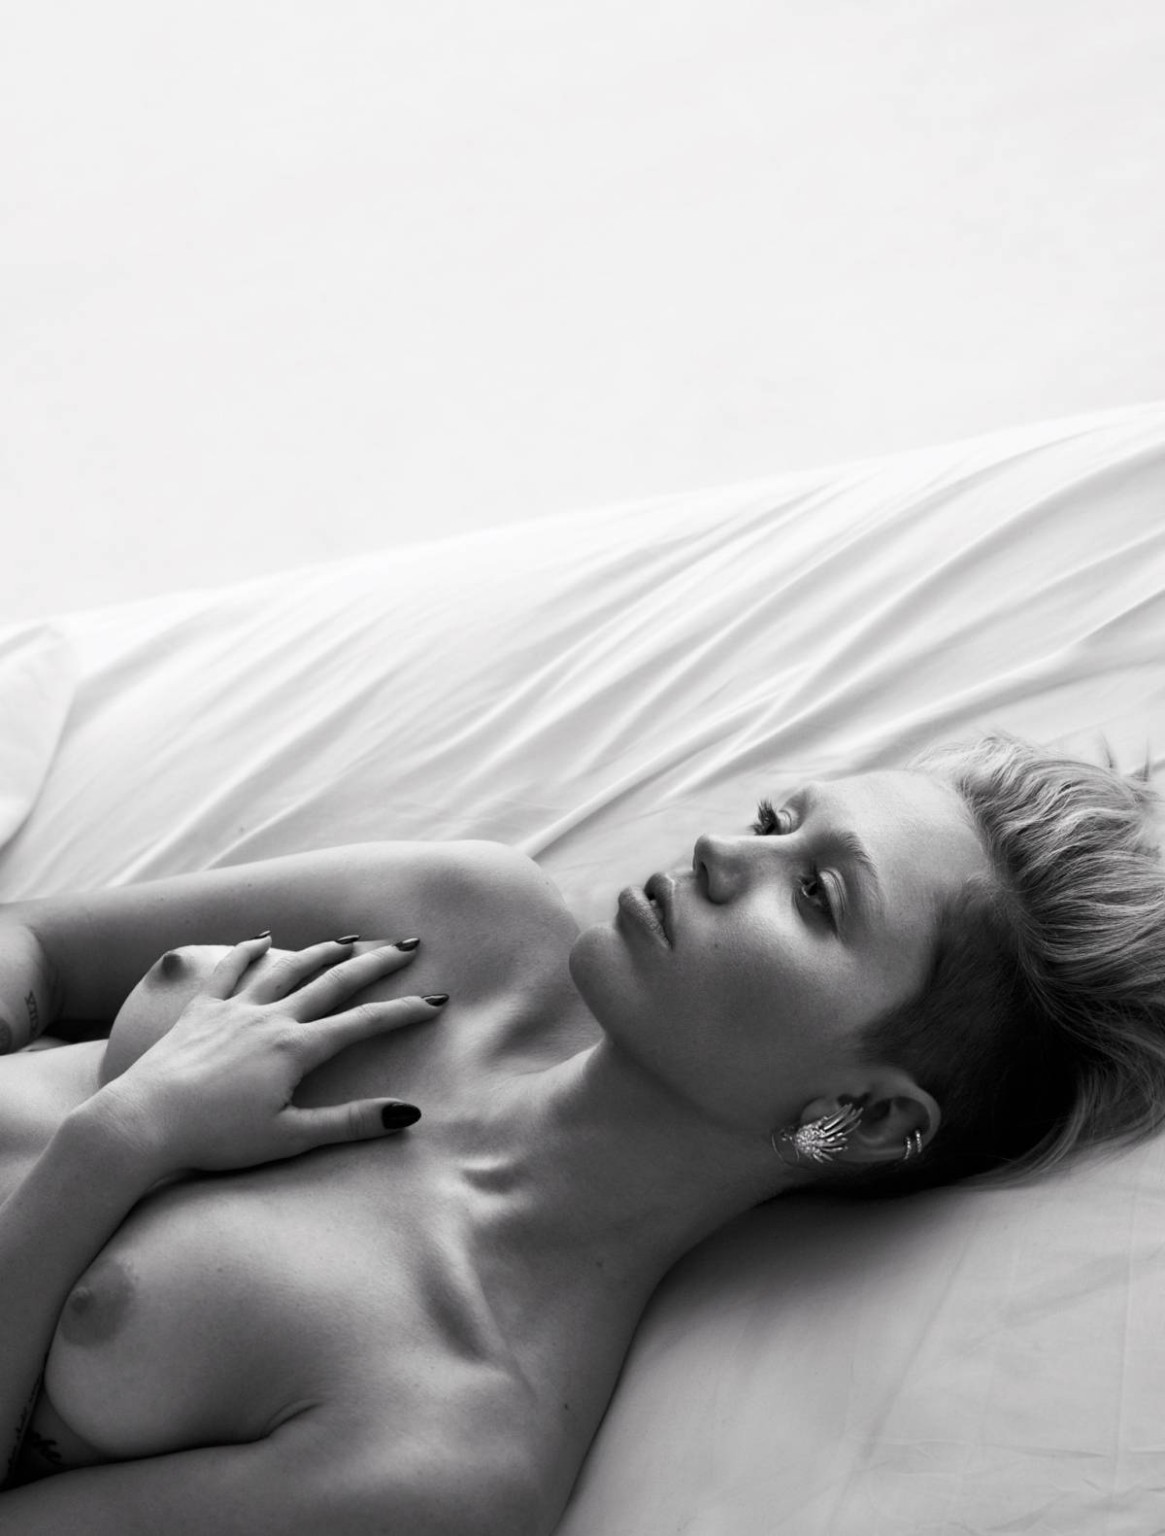 Miley Cyrus Topless In Magazine Photoshoot